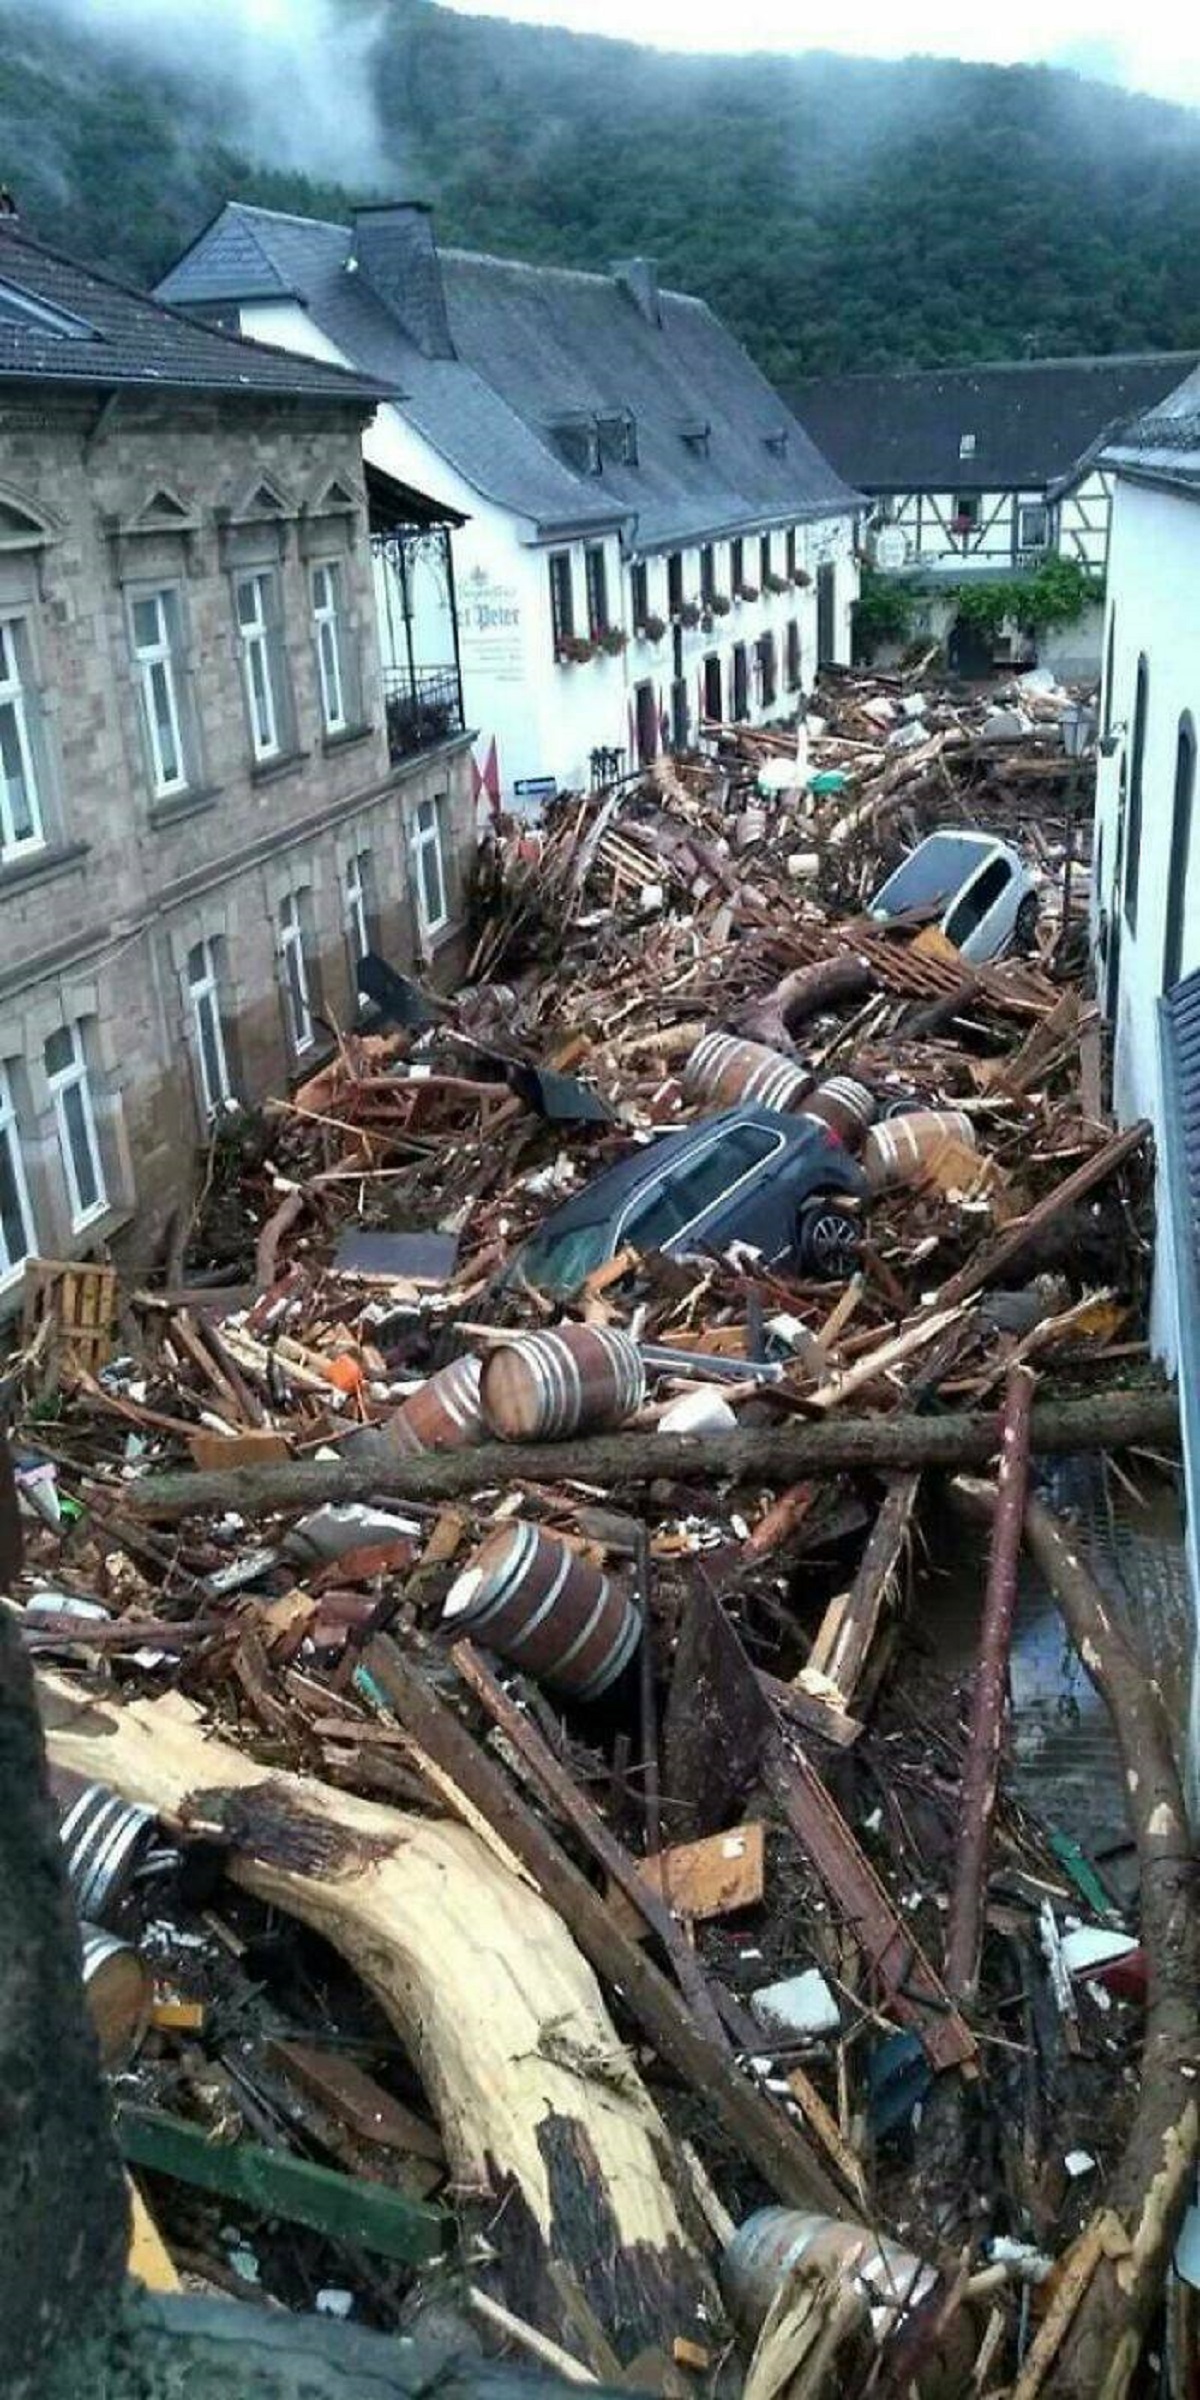 "The Aftermath Of Recent Flooding In Germany"